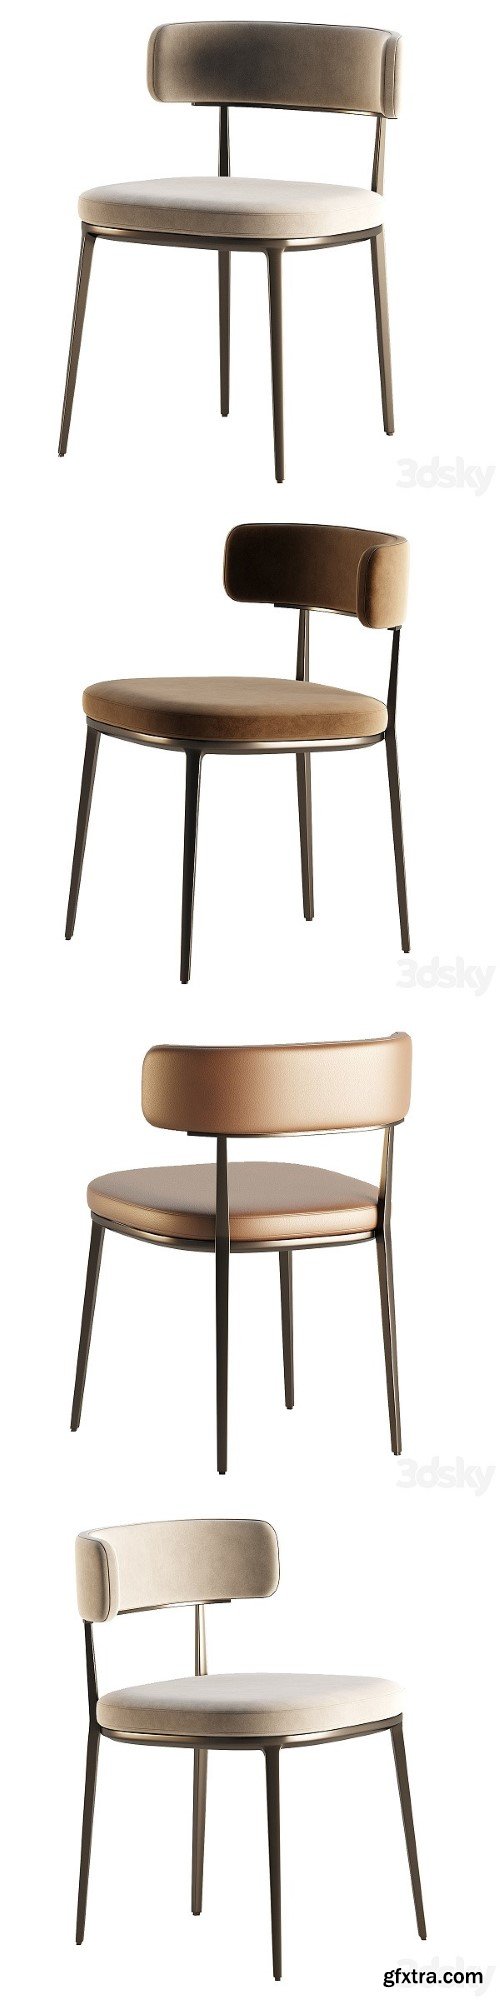 CARATOS Chair With Armrests By Maxalto